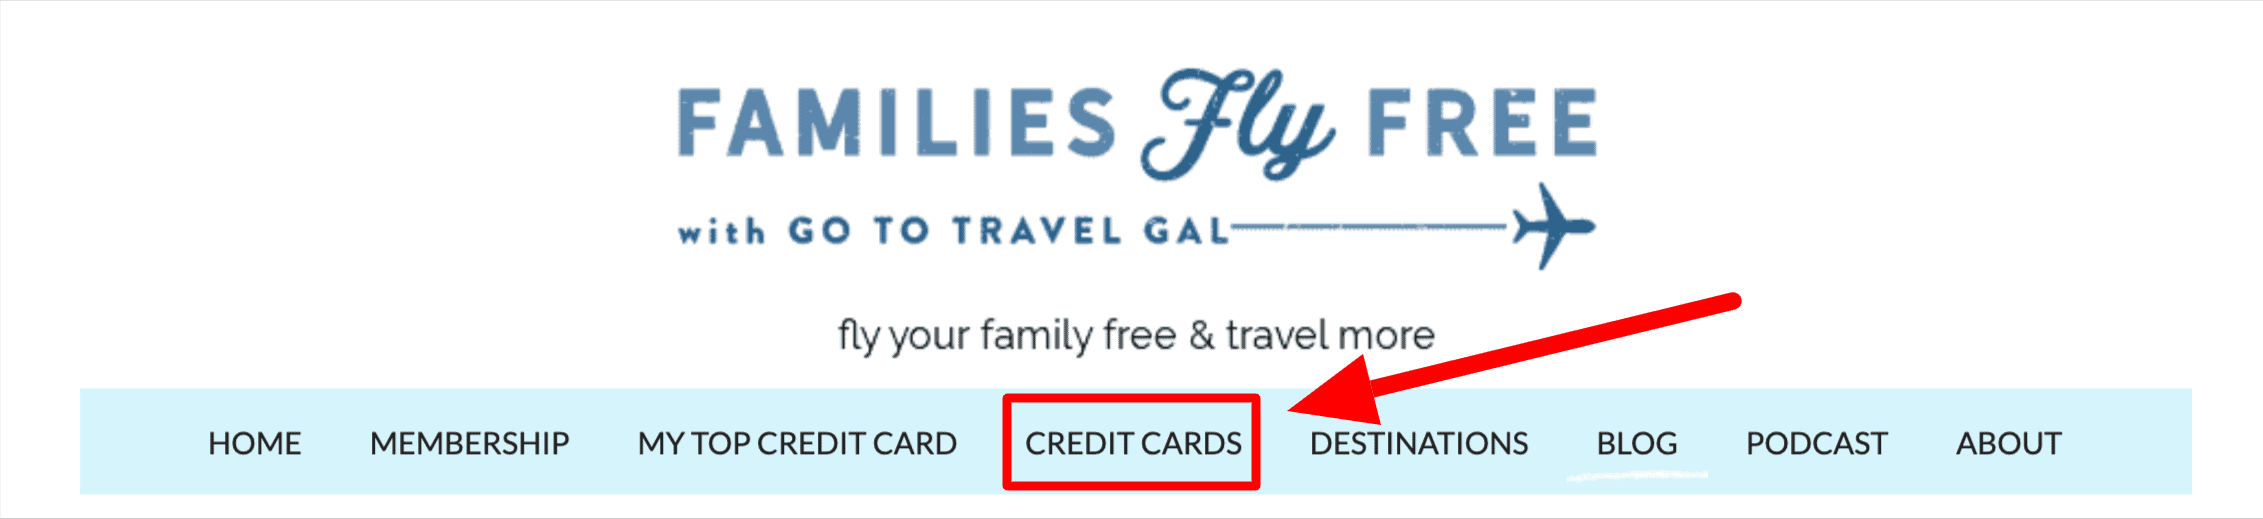 Image of Families Fly Free website with red arrow pointing to link for credit cards